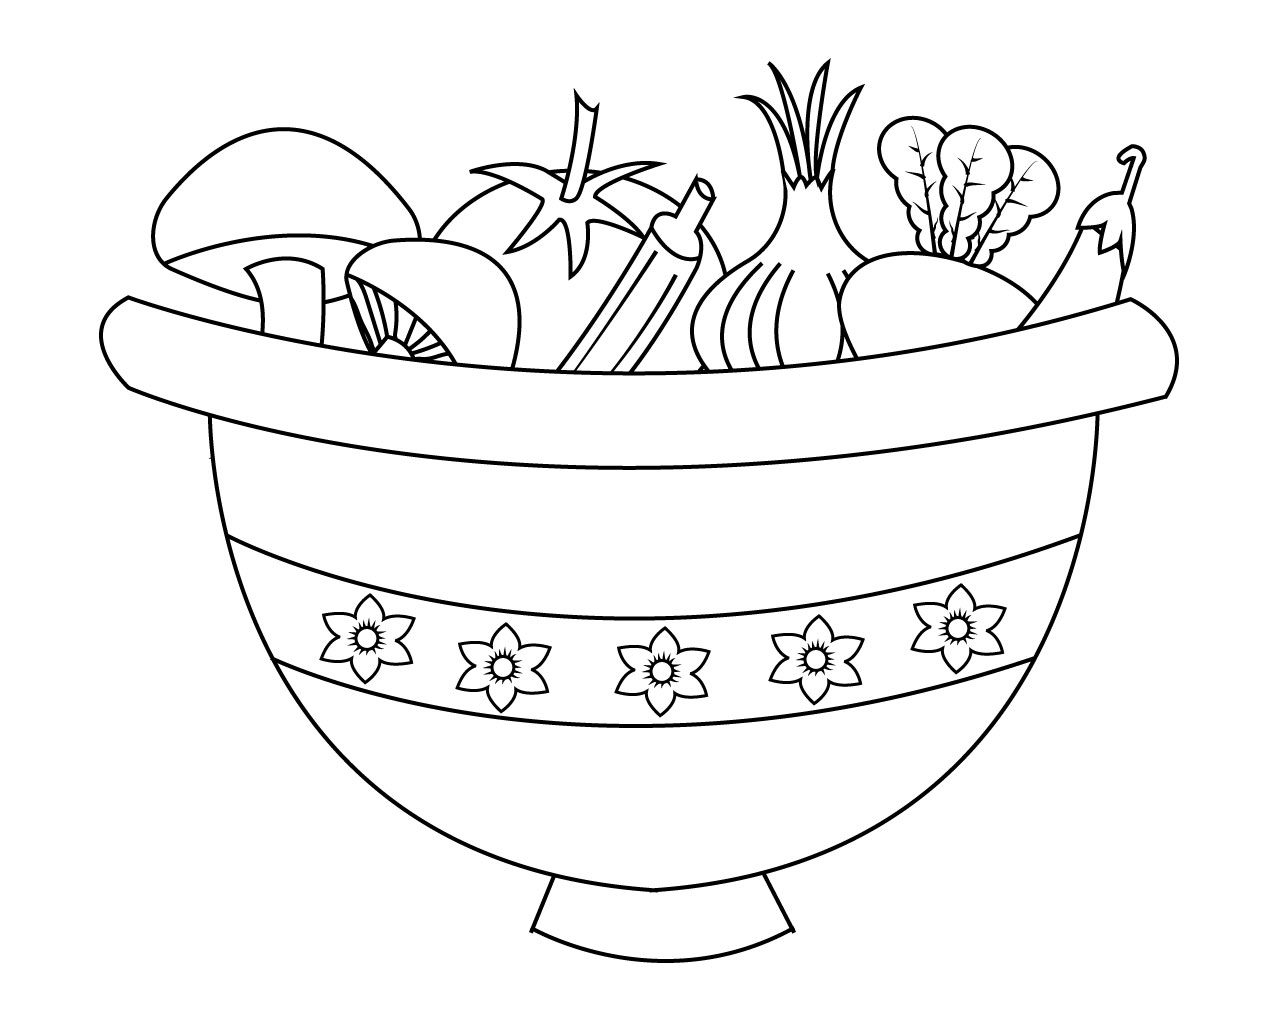 Vegetable Basket Sketch at PaintingValley.com | Explore collection of